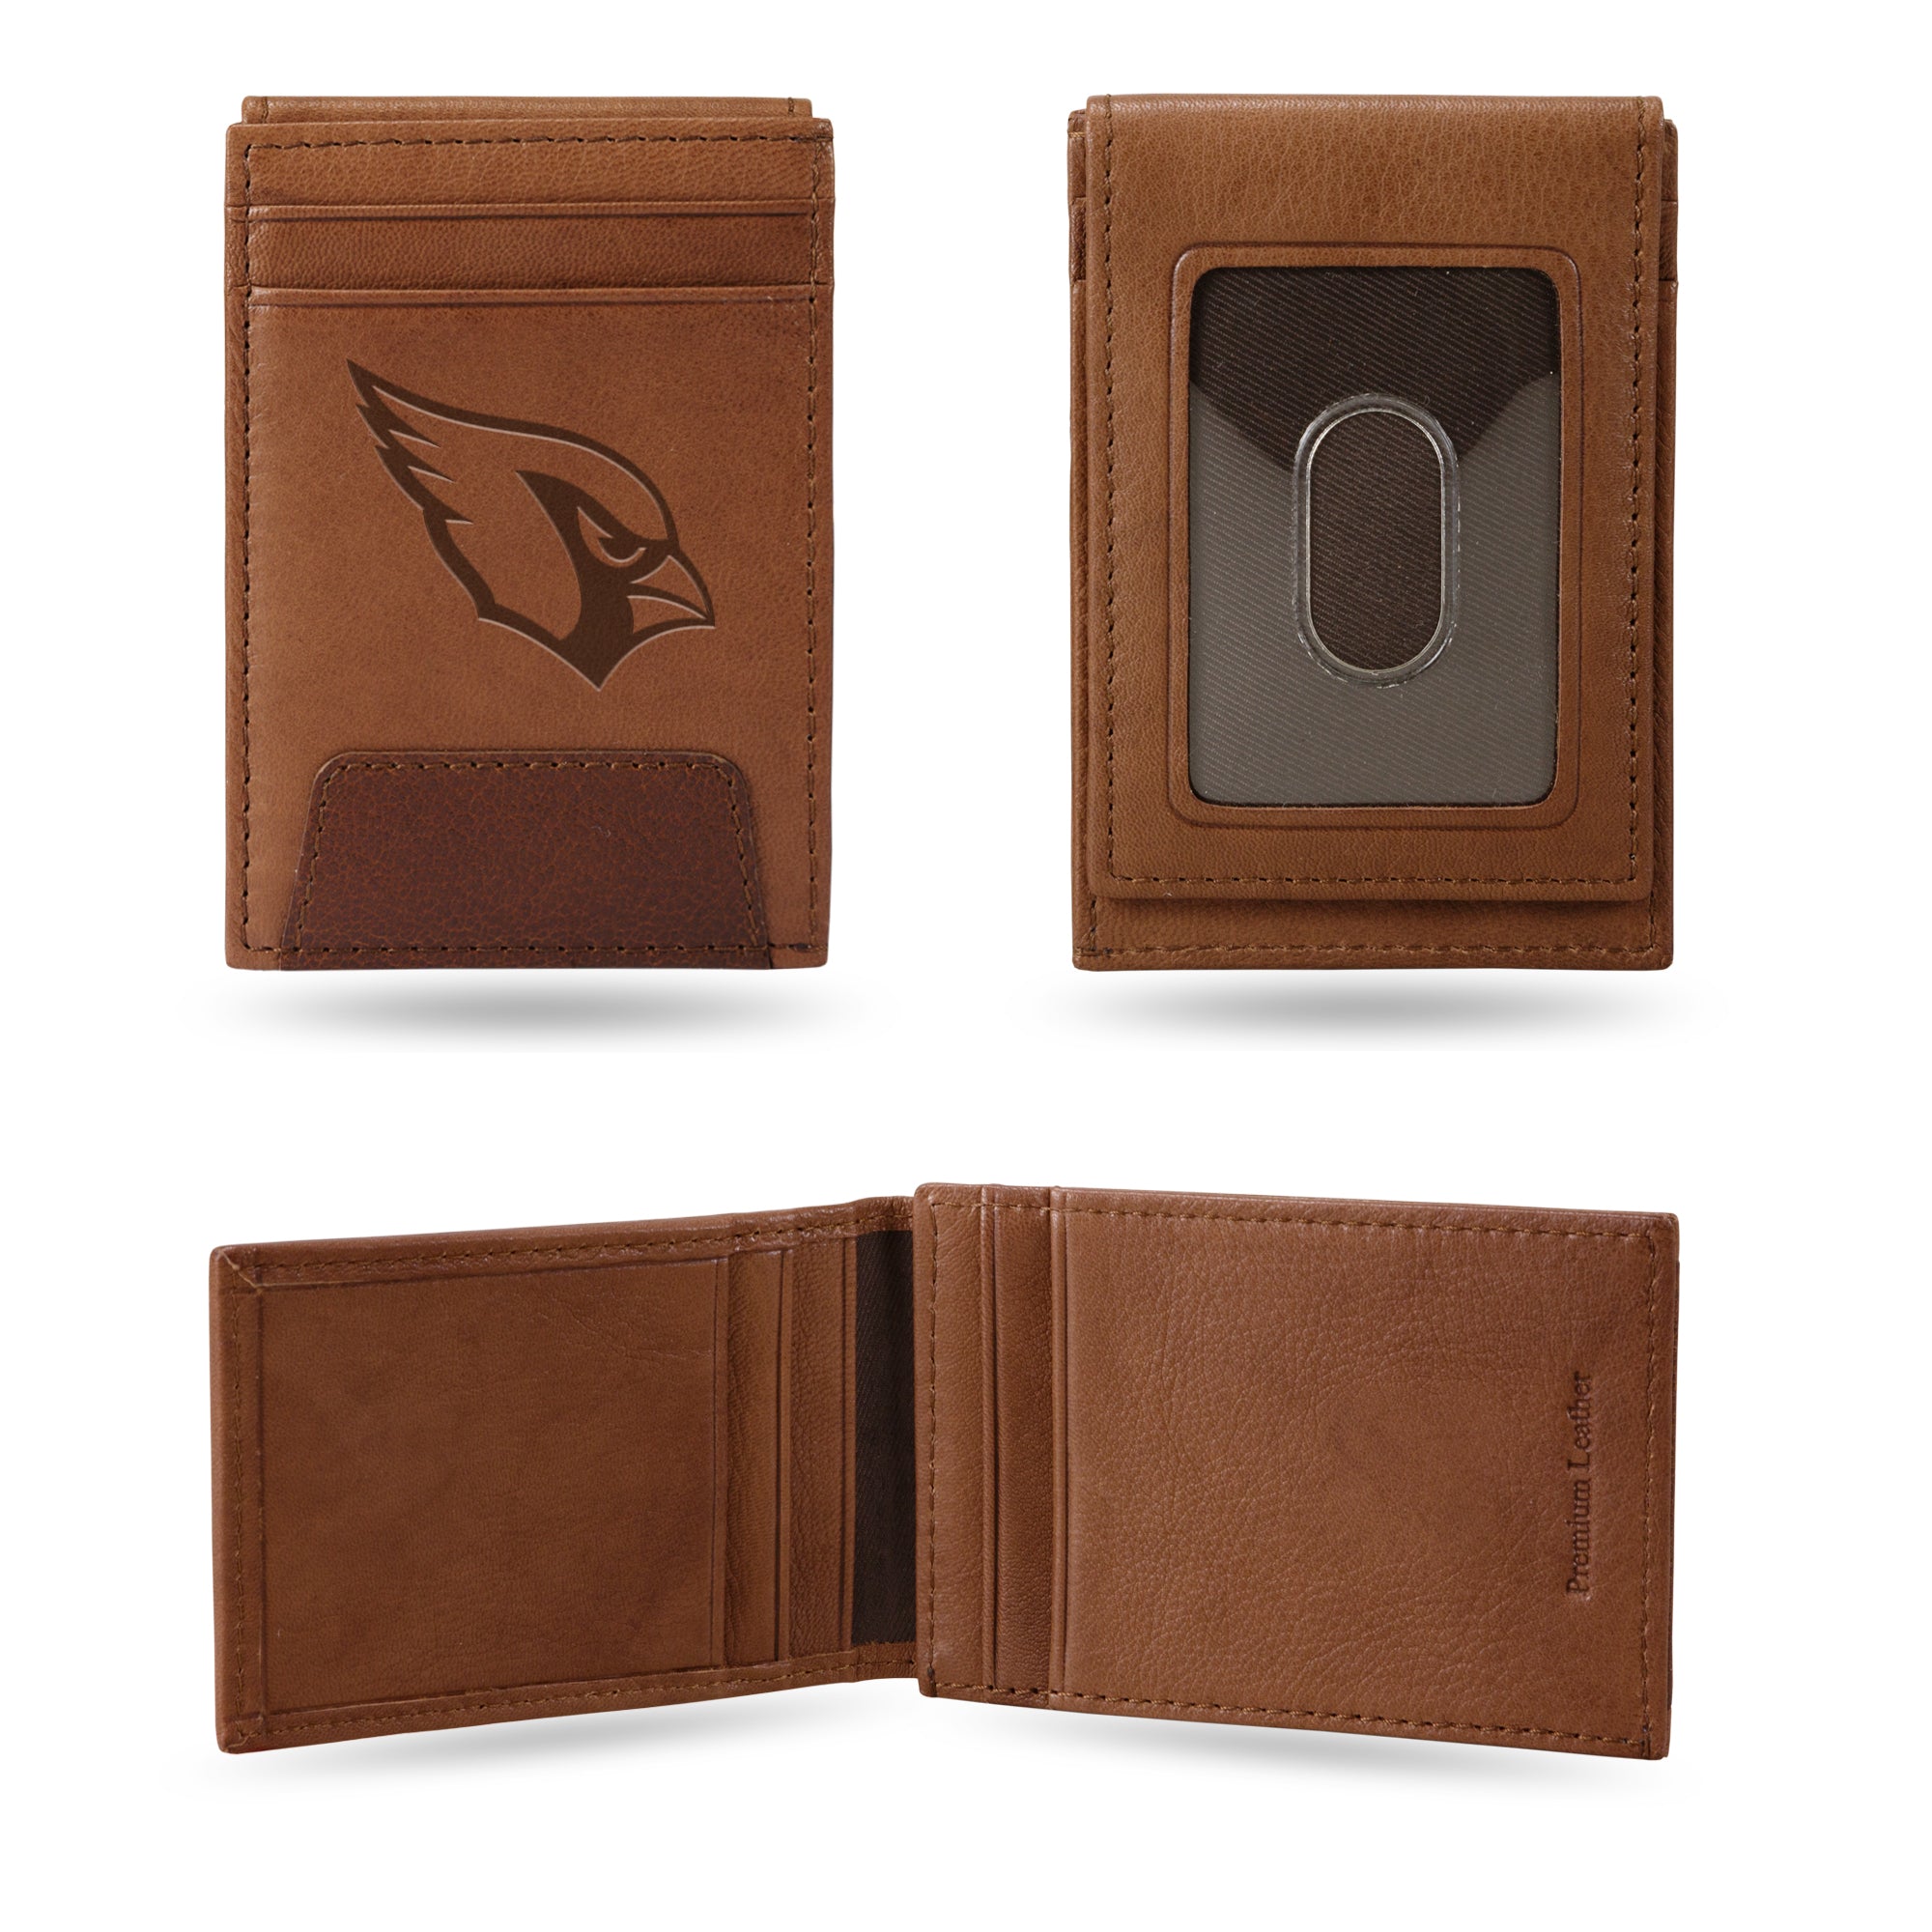 NFL Arizona Cardinals Genuine Leather Front Pocket Wallet - Slim Wallet By Rico Industries